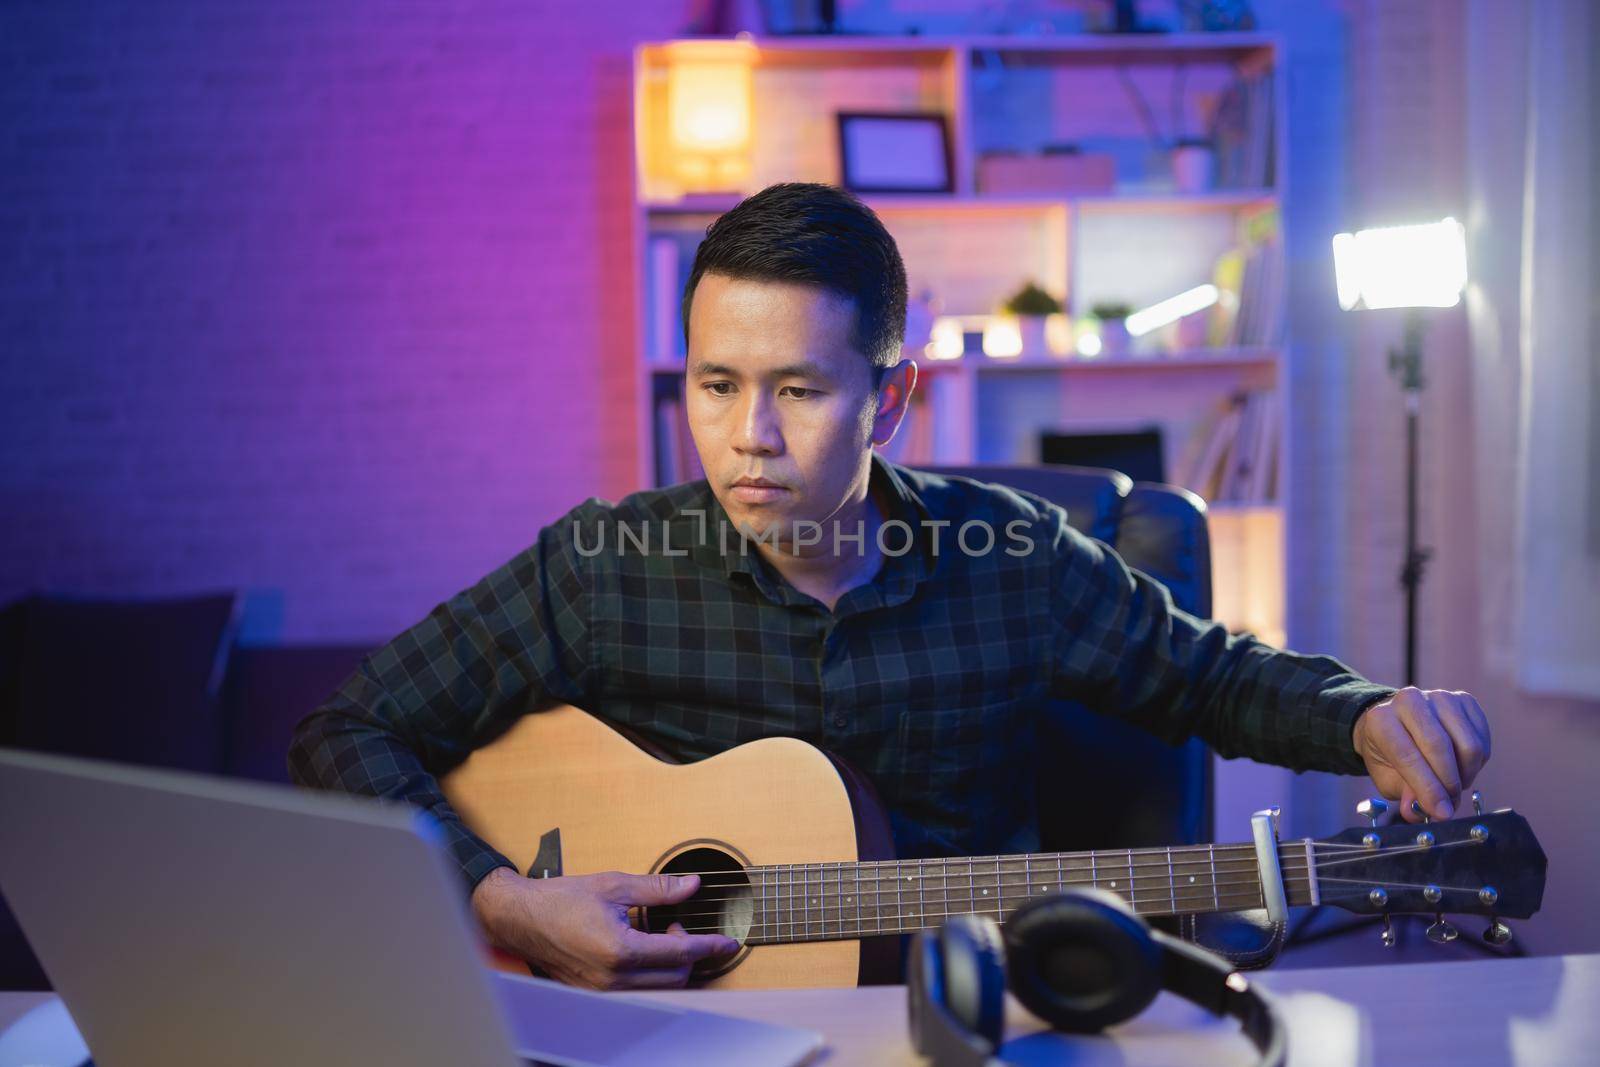 Asian man youtuber live streaming perfomance playing guitar and sing a song. Asian man teaching guitar and singing online. Musician recording music with laptop and playing acoustic guitar.